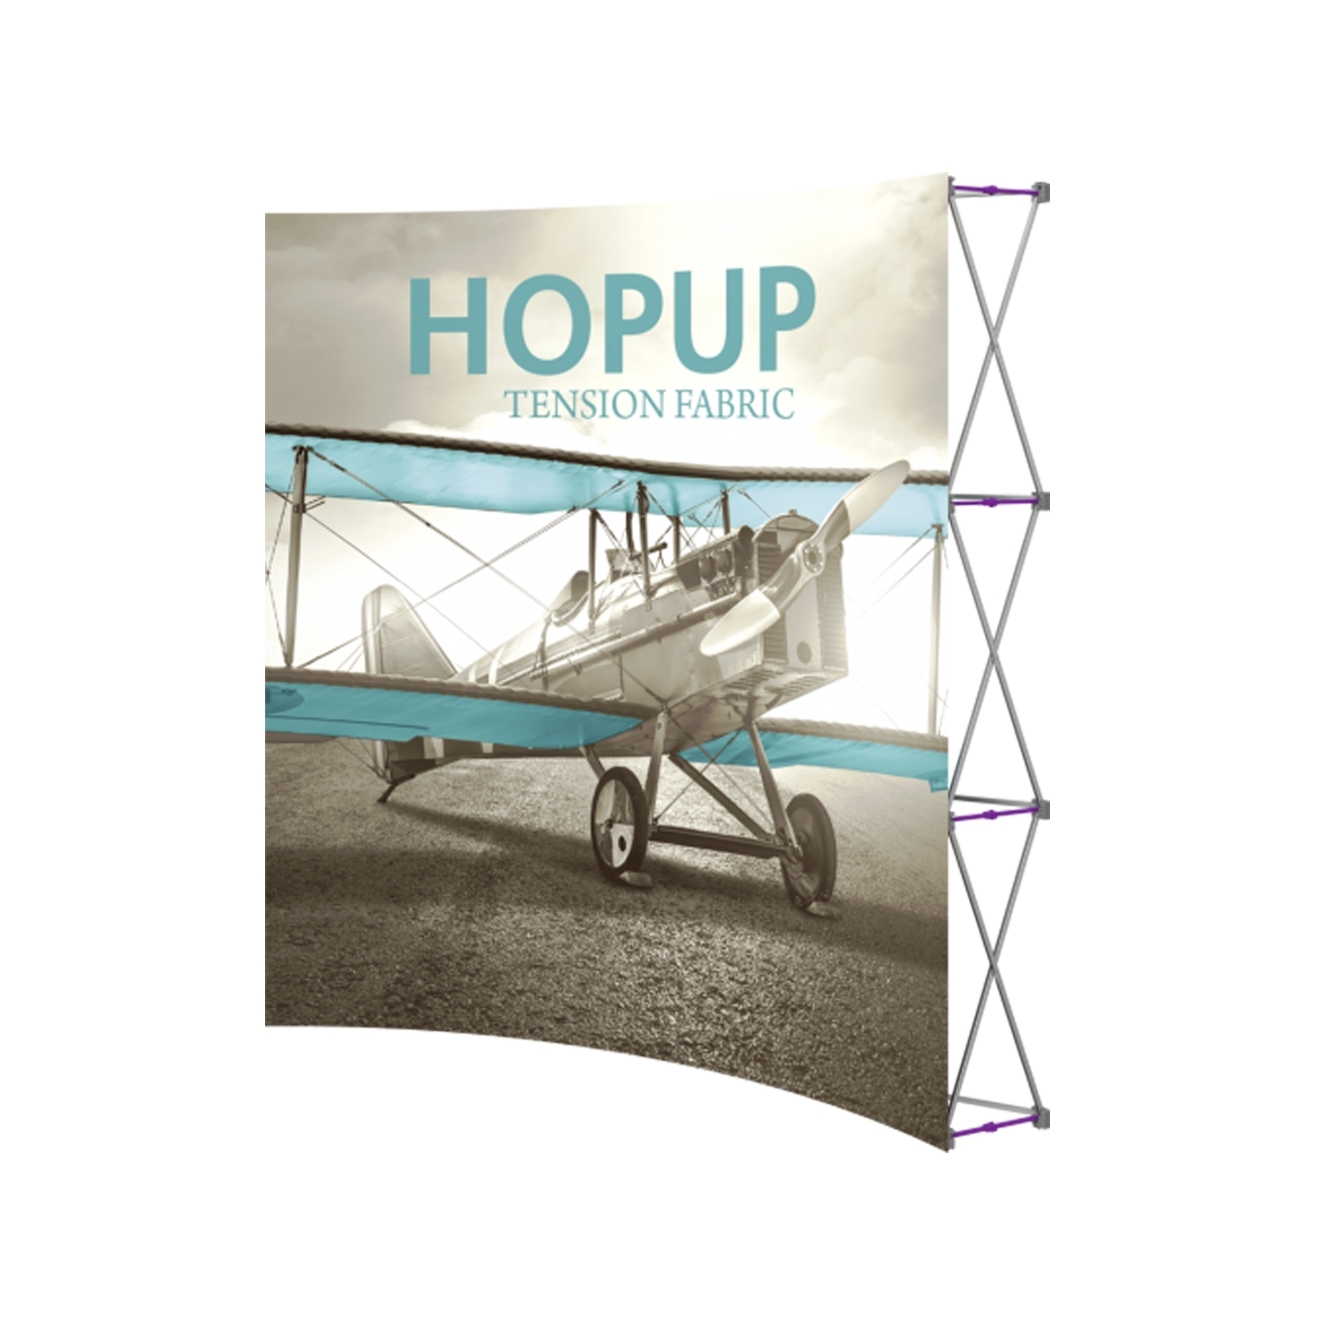 Pop-Fab 3x3 Full Height Curved Tension Fabric Display